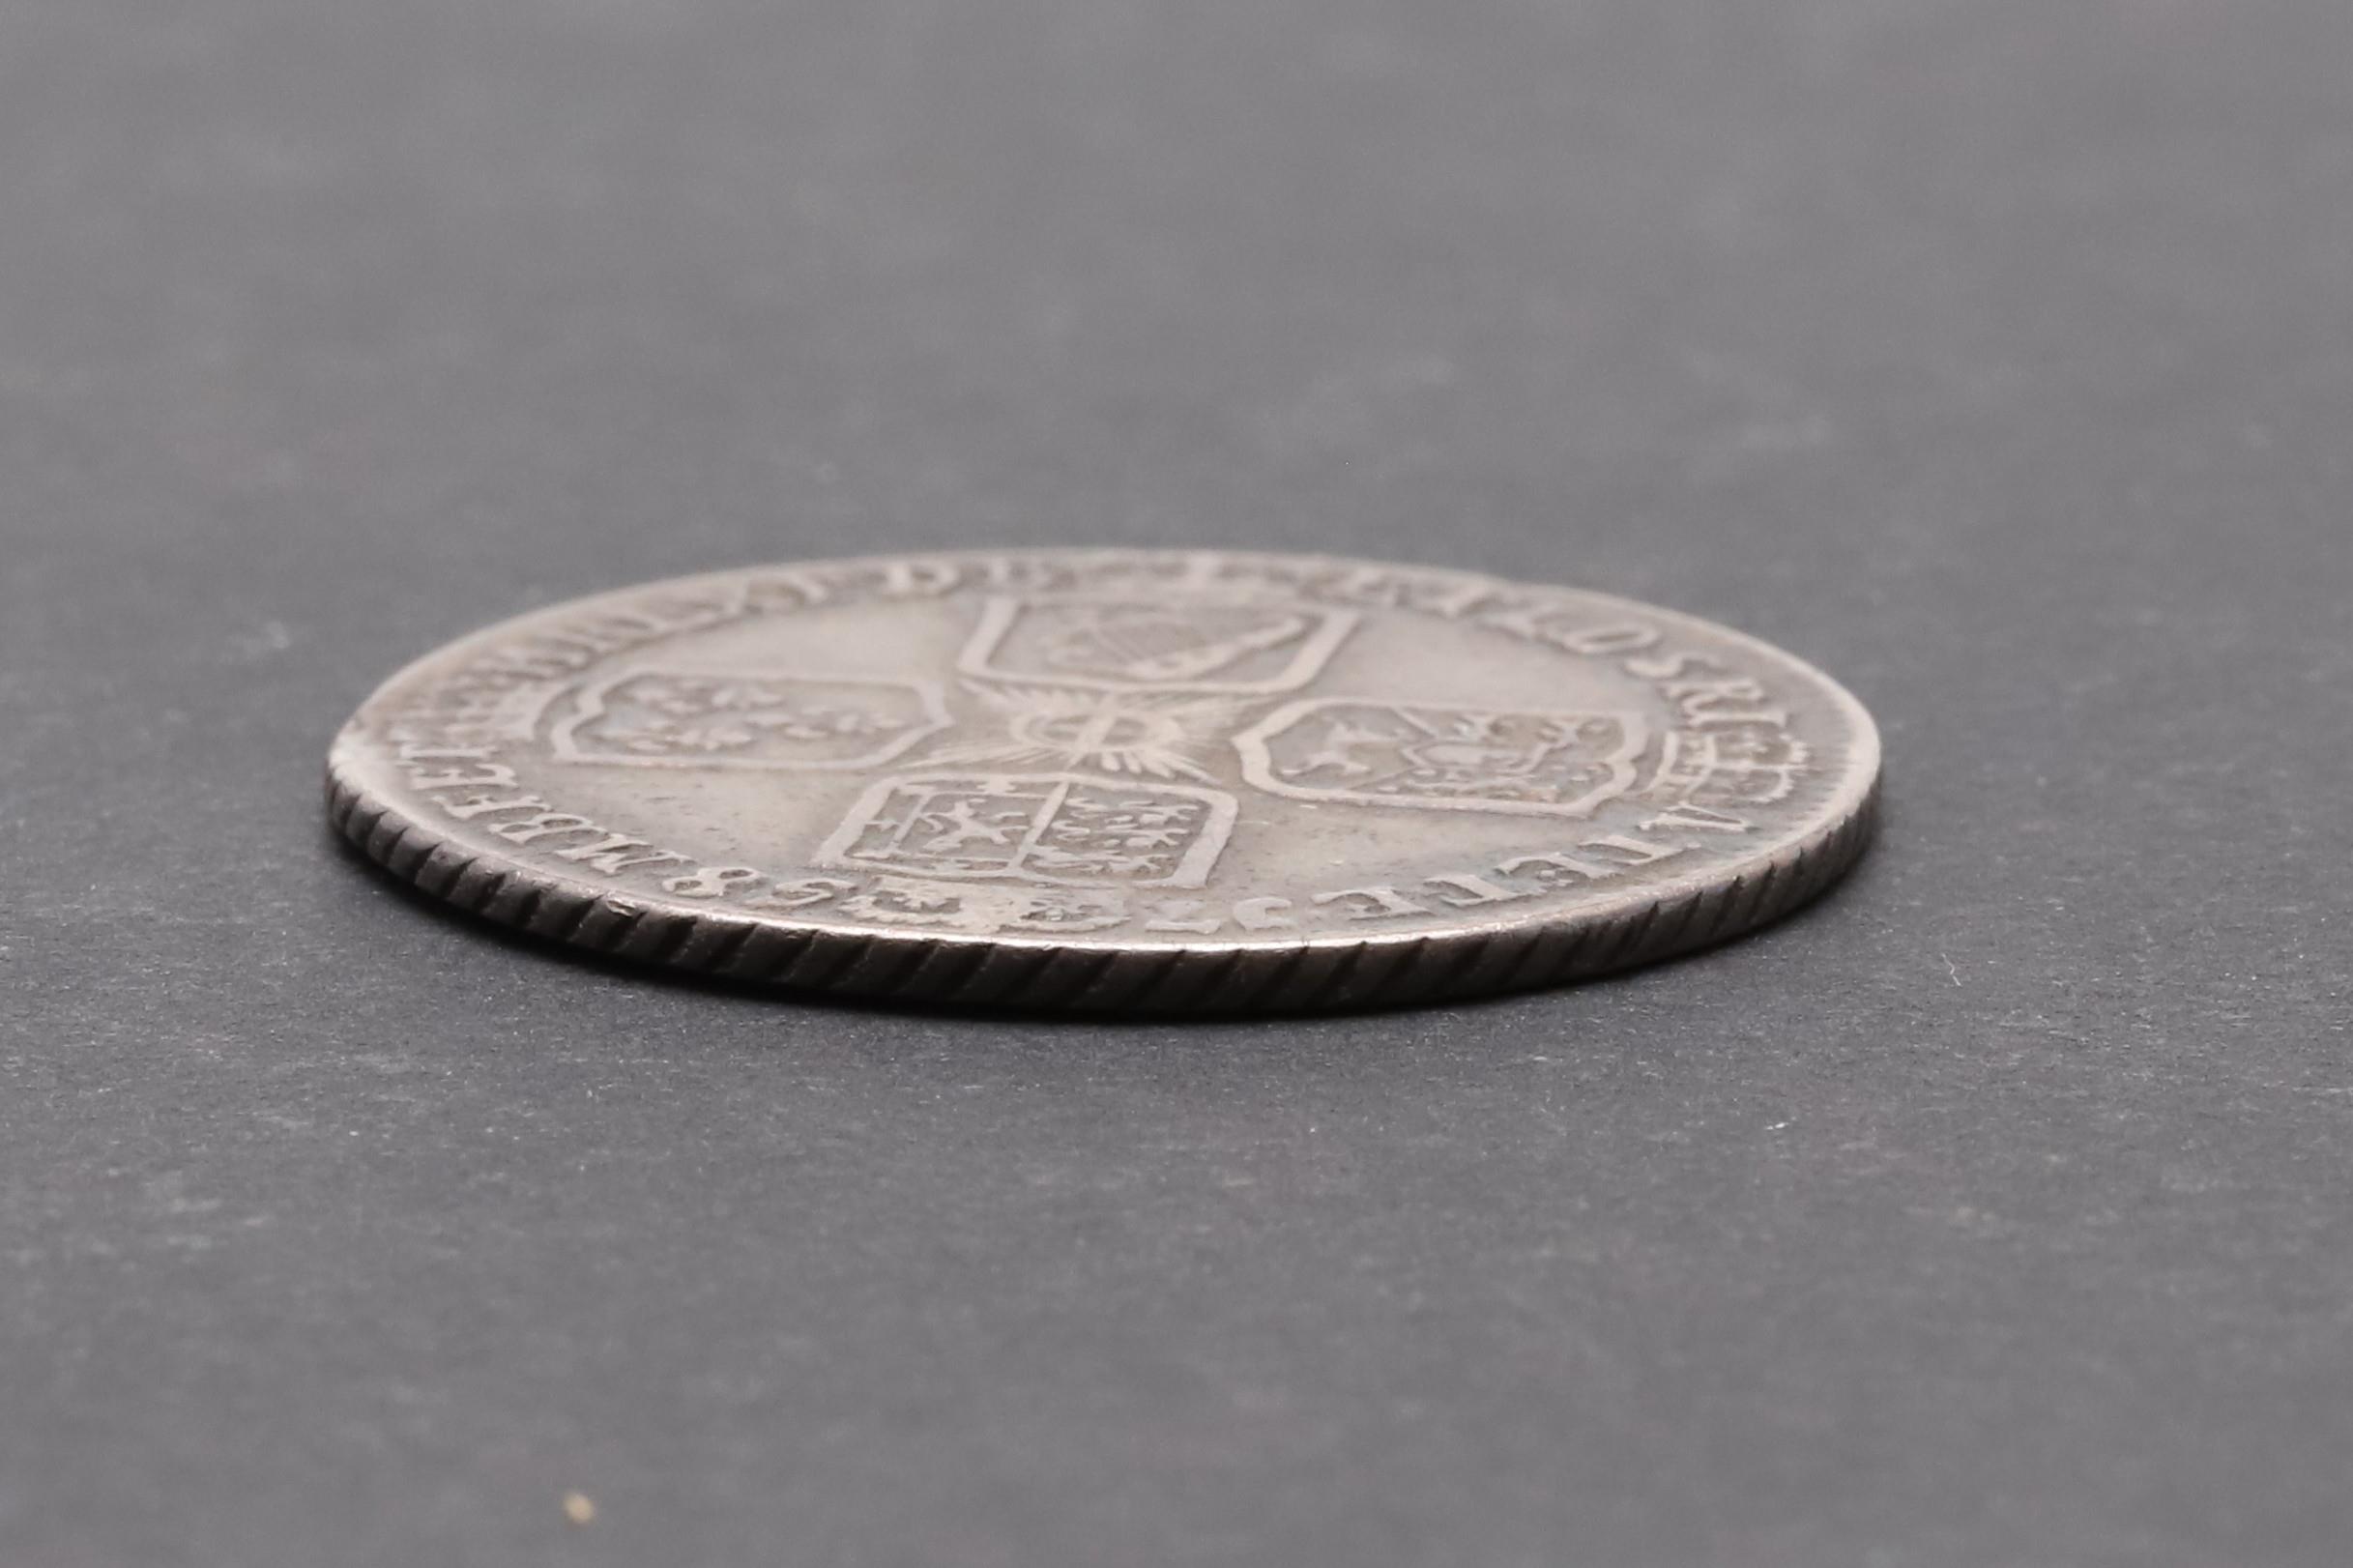 A GEORGE II SHILLING, 1758. - Image 3 of 3